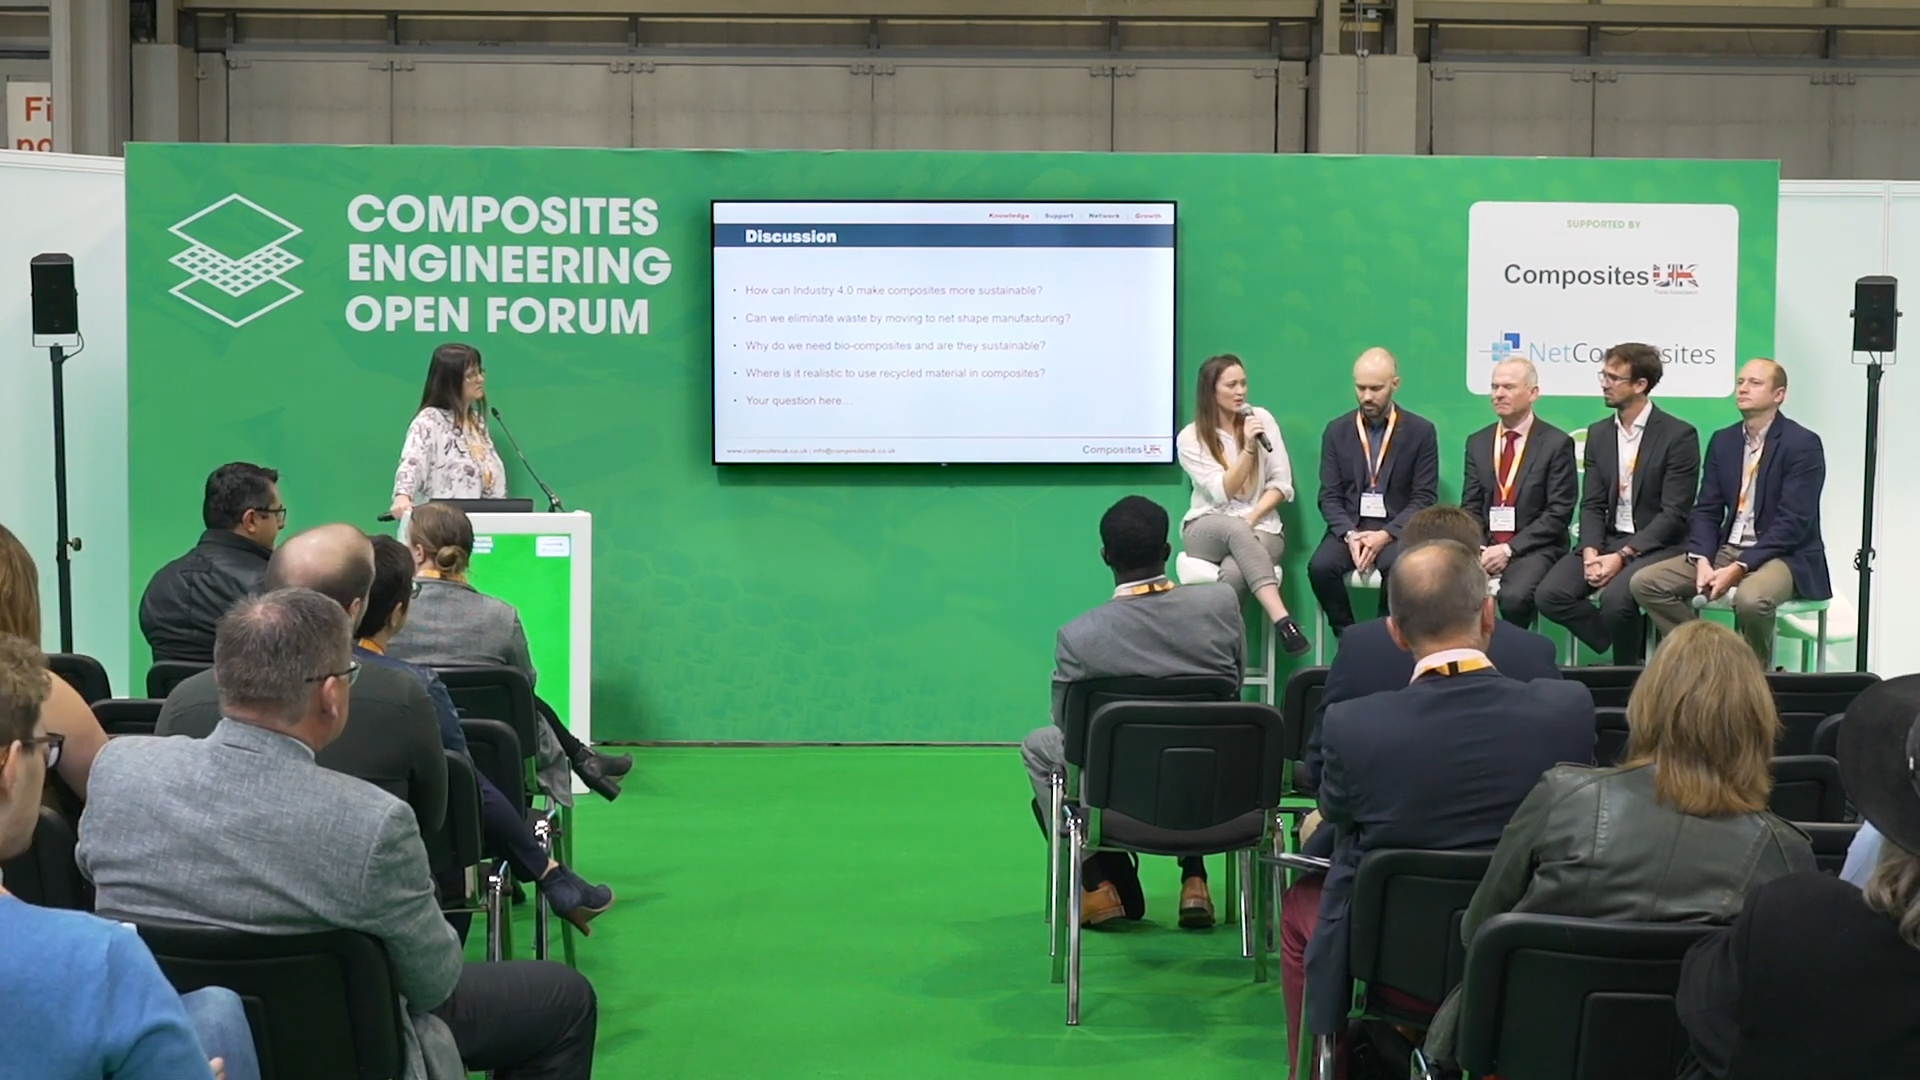 A discussion about composites in the circular economy is now available to view on YouTube.